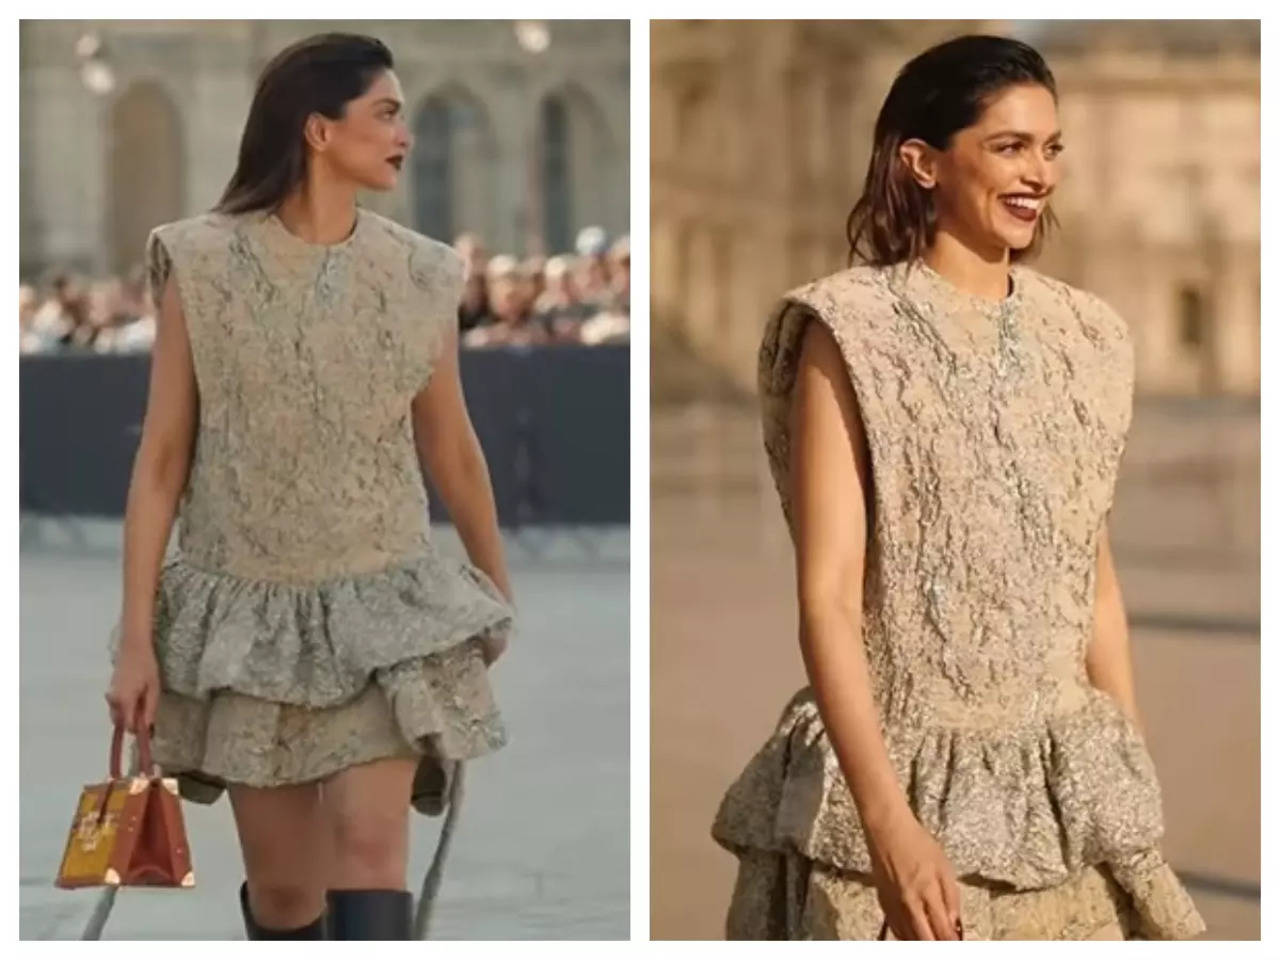 What's Deepika Doing Looking So Gorgeous In Paris? - Rediff.com